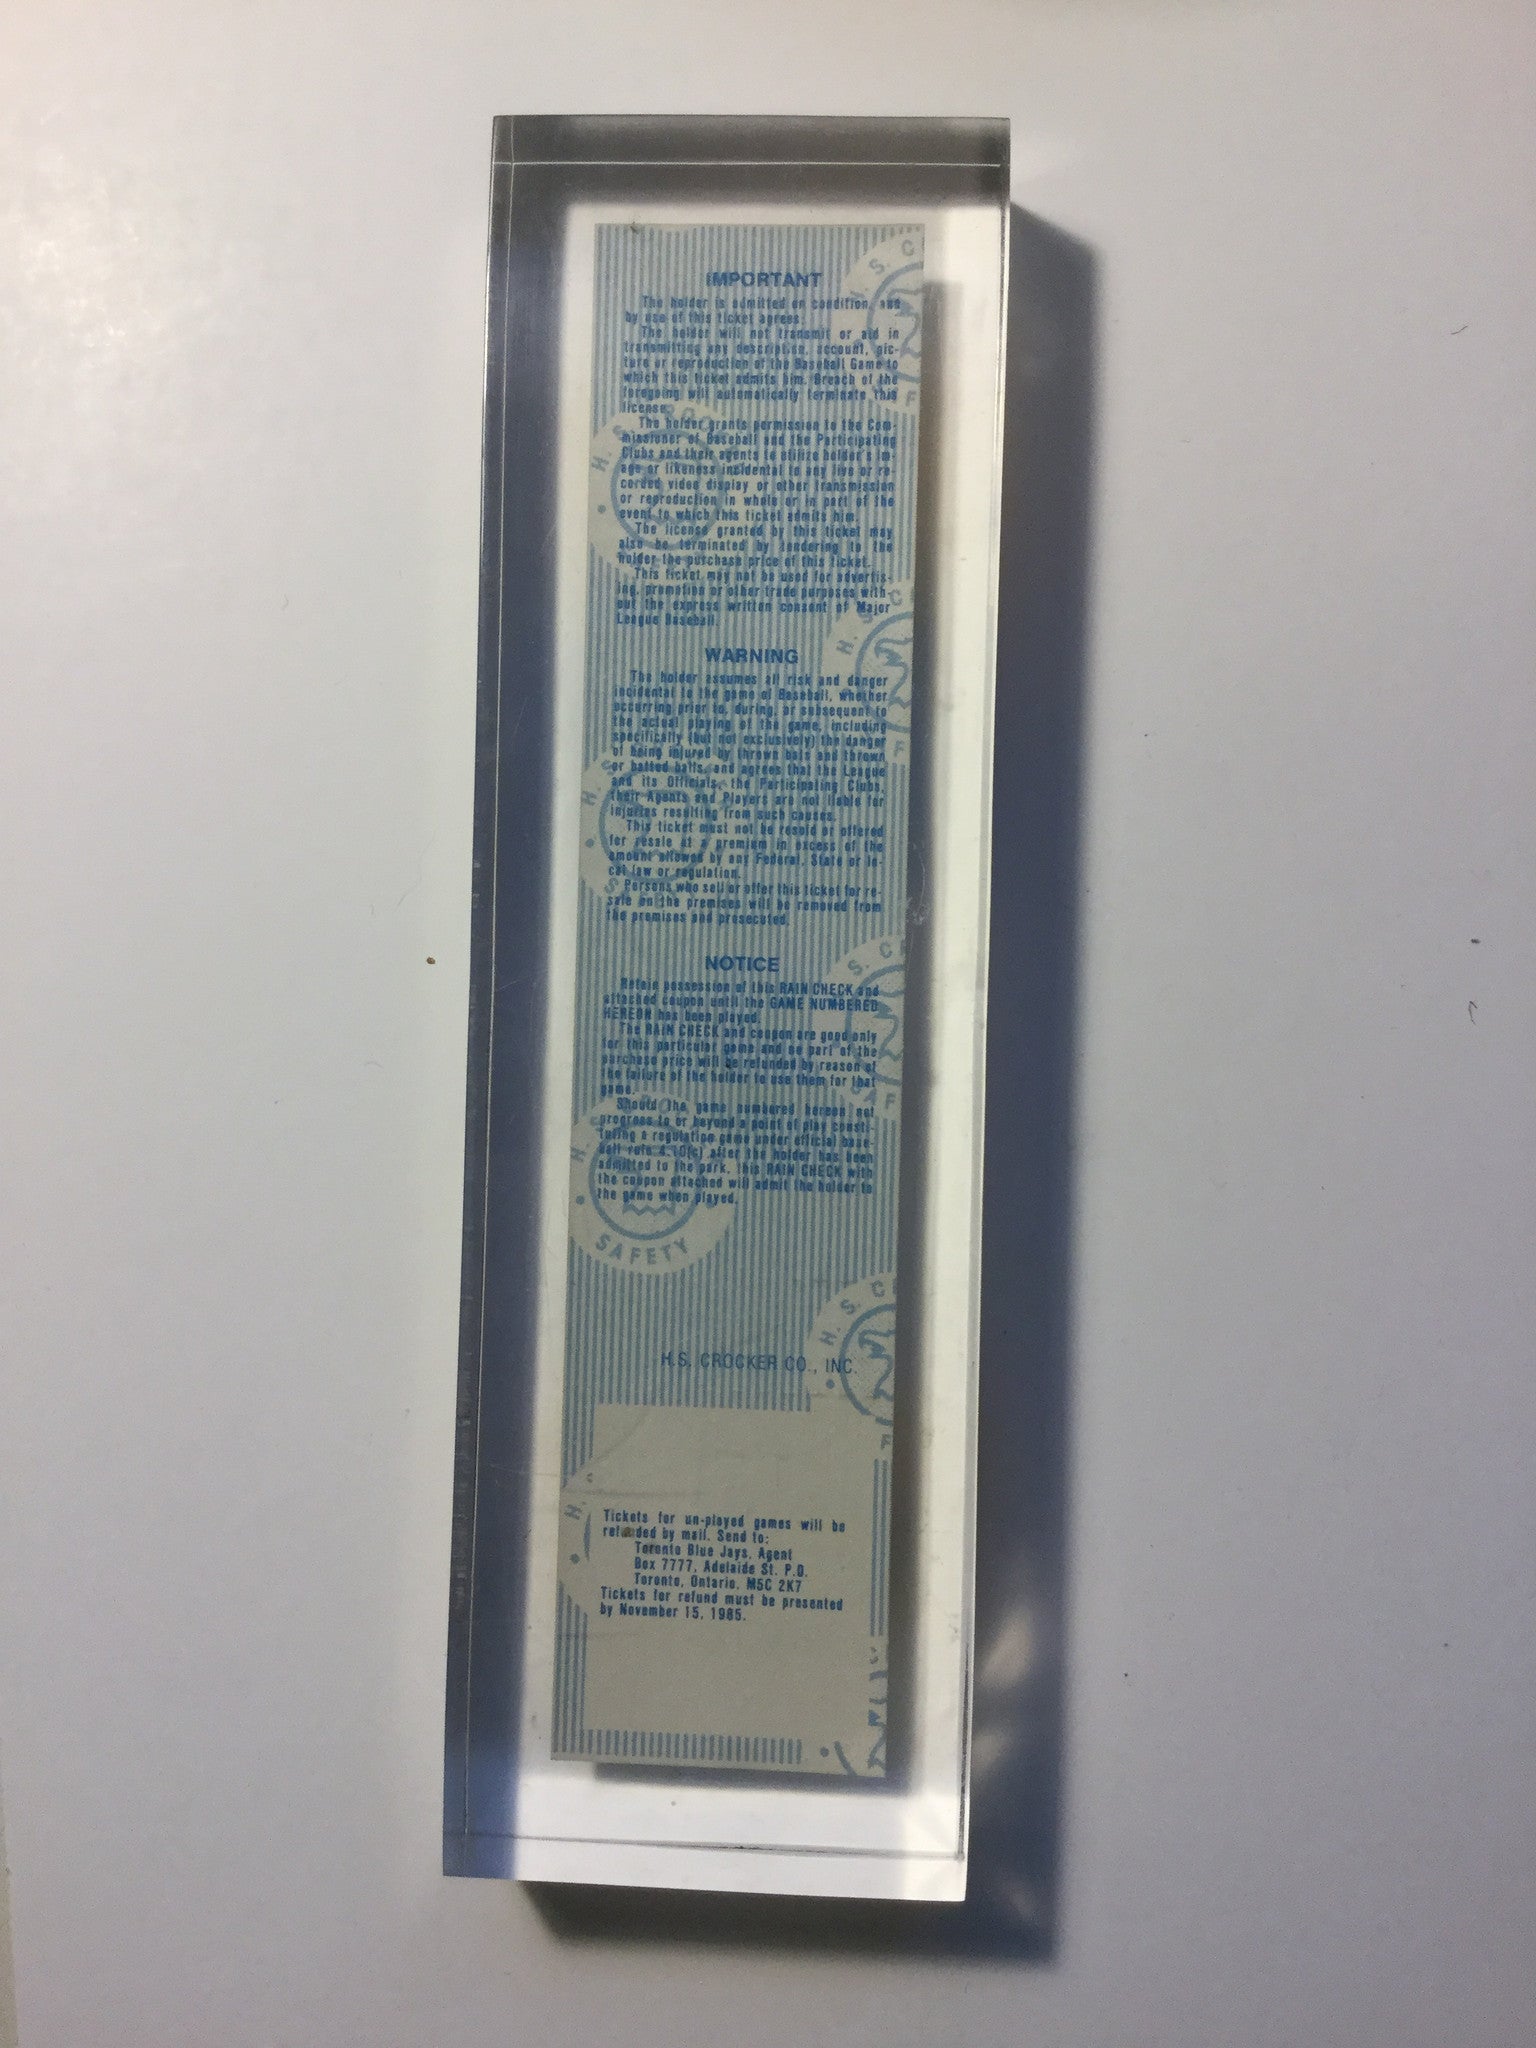 Blue Jays baseball game 7 ticket in lucite 1985